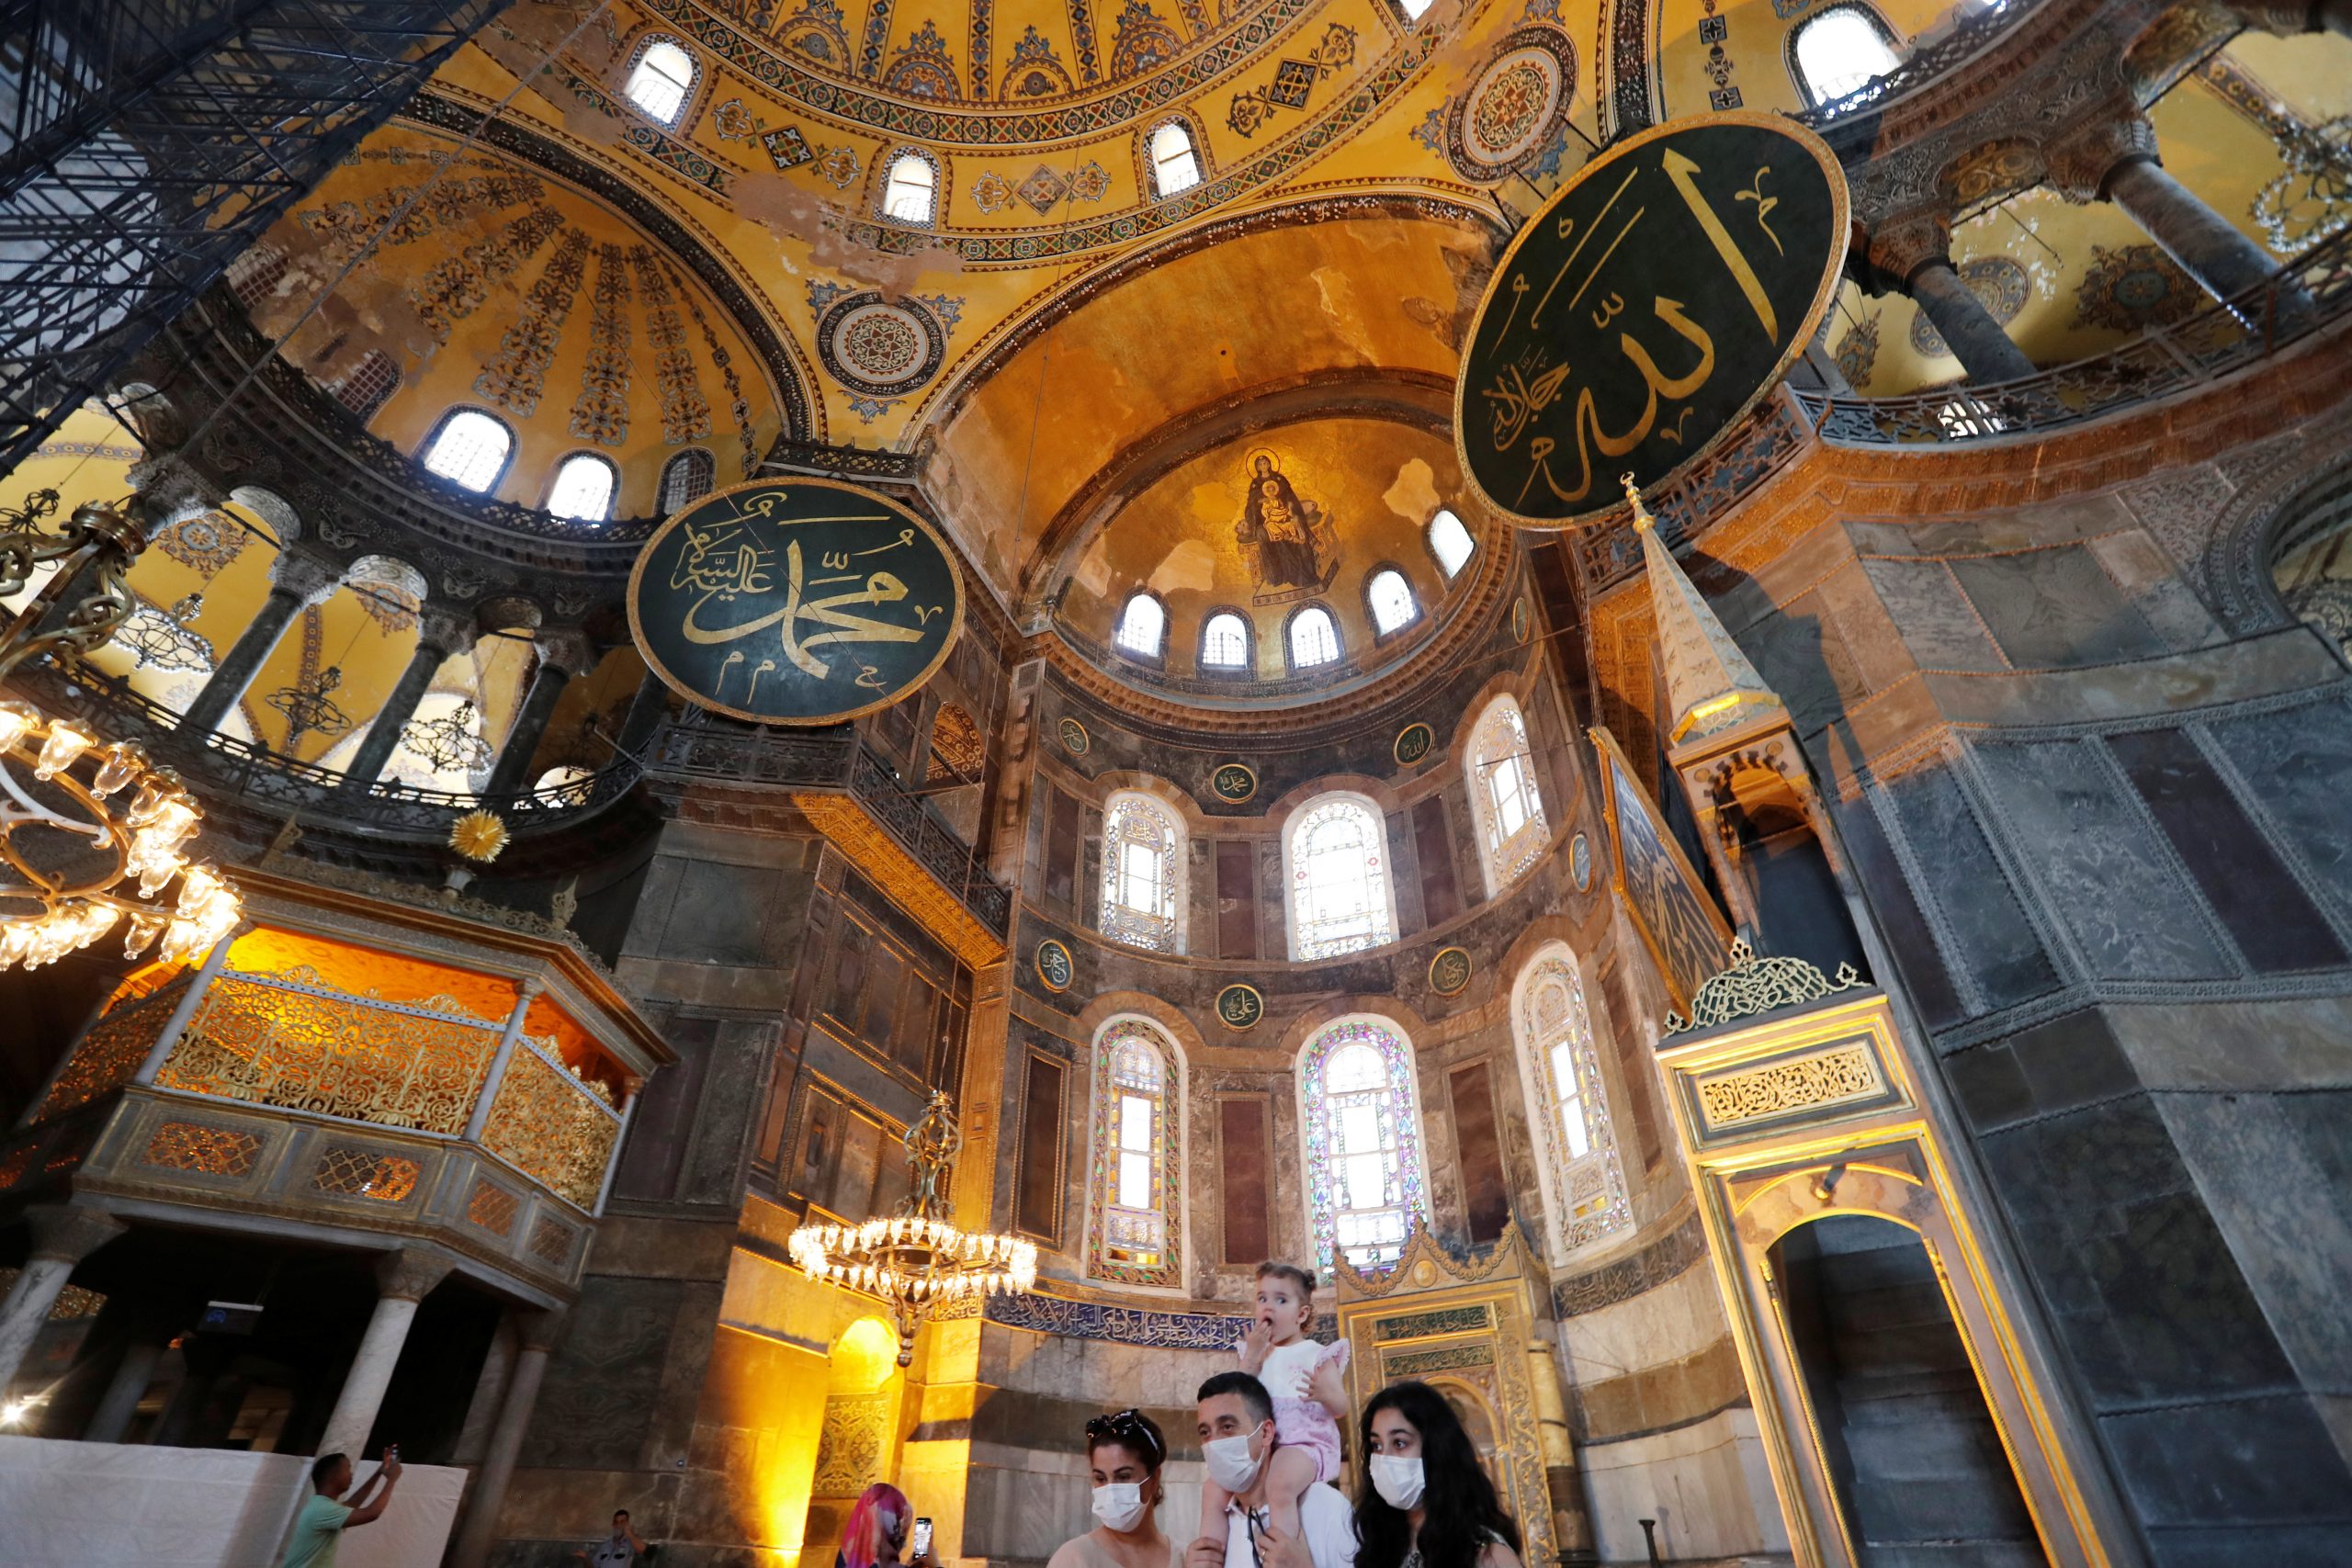 Church bells to toll for five minutes as prayers held at Hagia Sophia (Upda...